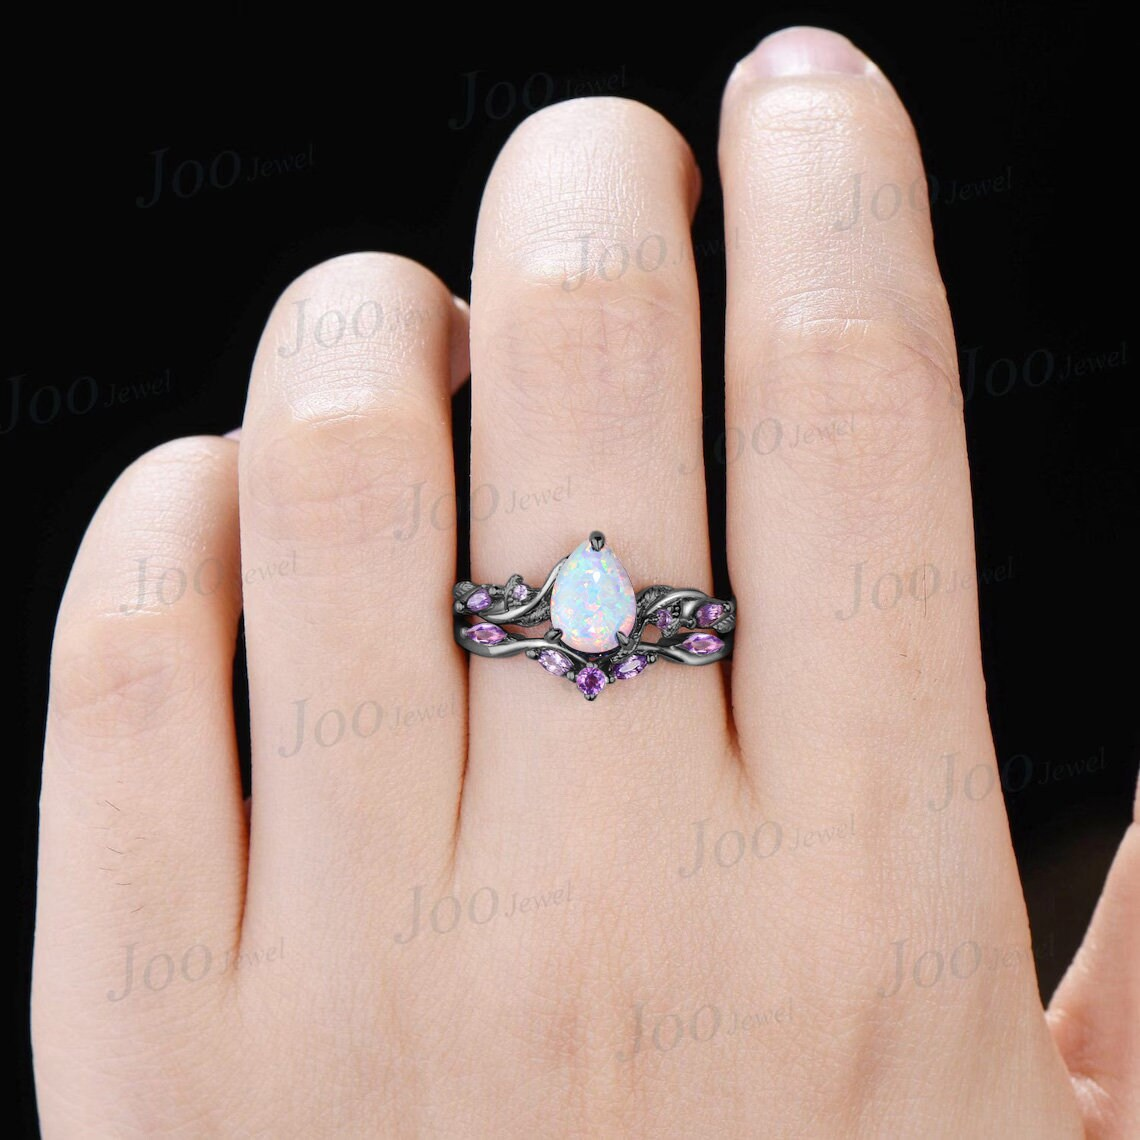 Nature Inspired Opal Engagement Ring Twisted Band 1.25ct Pear Cut Opal Amethyst Branch Vine Wedding Ring Set Black Gold Ring Set for Women